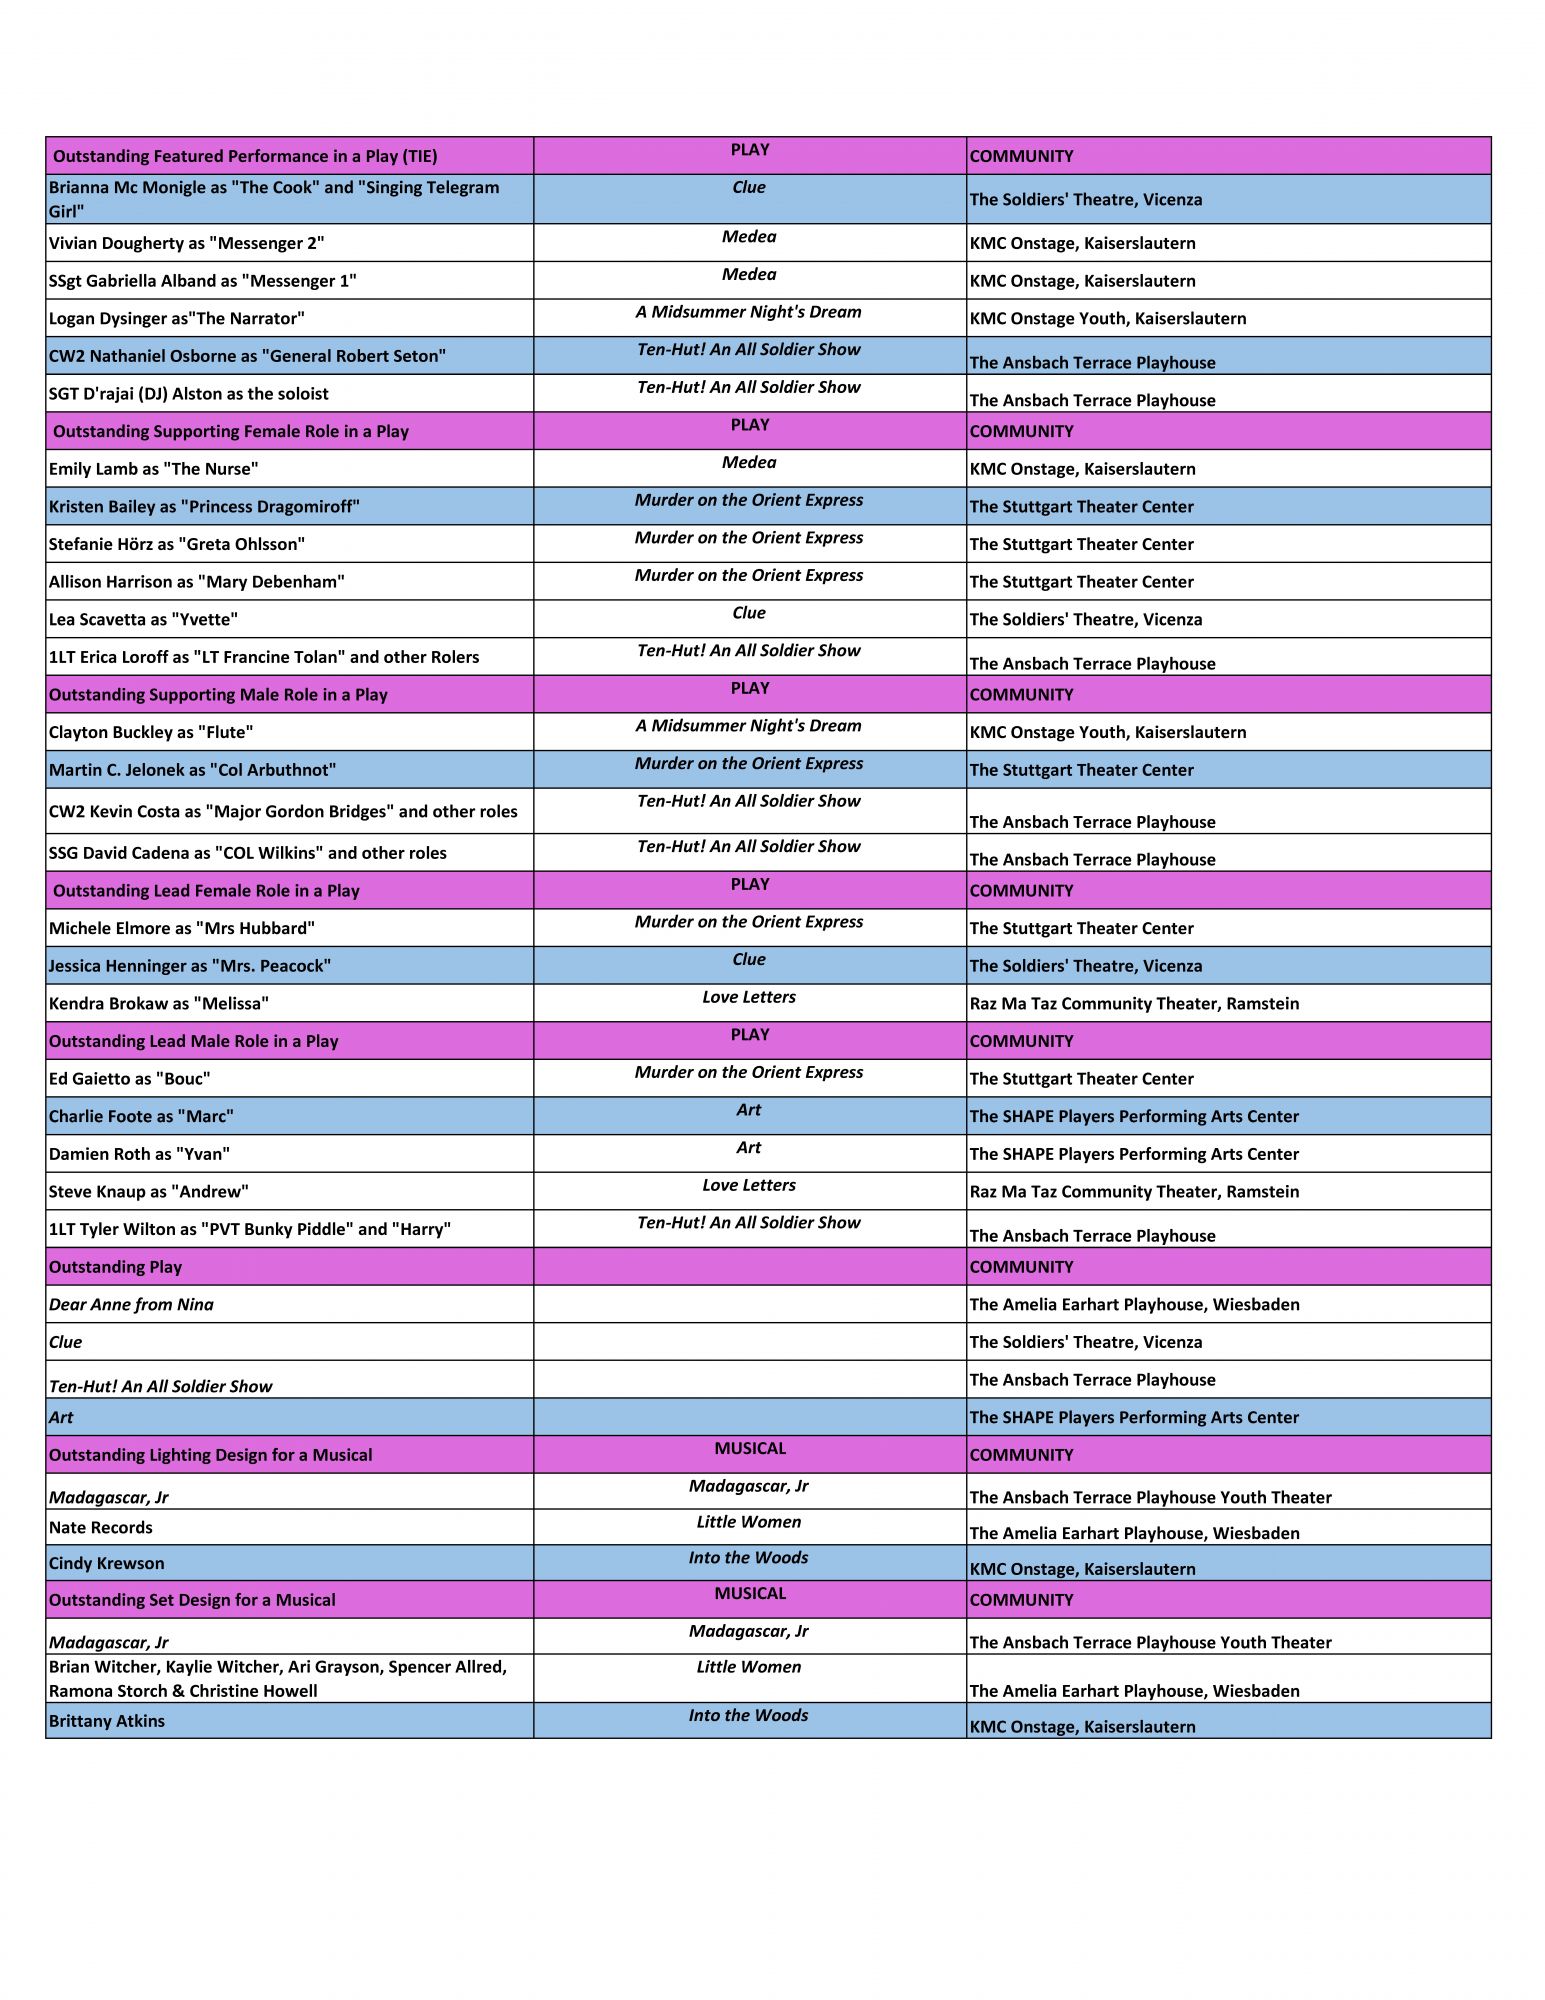 Awards and Nominations List for posting_Page_3.jpg